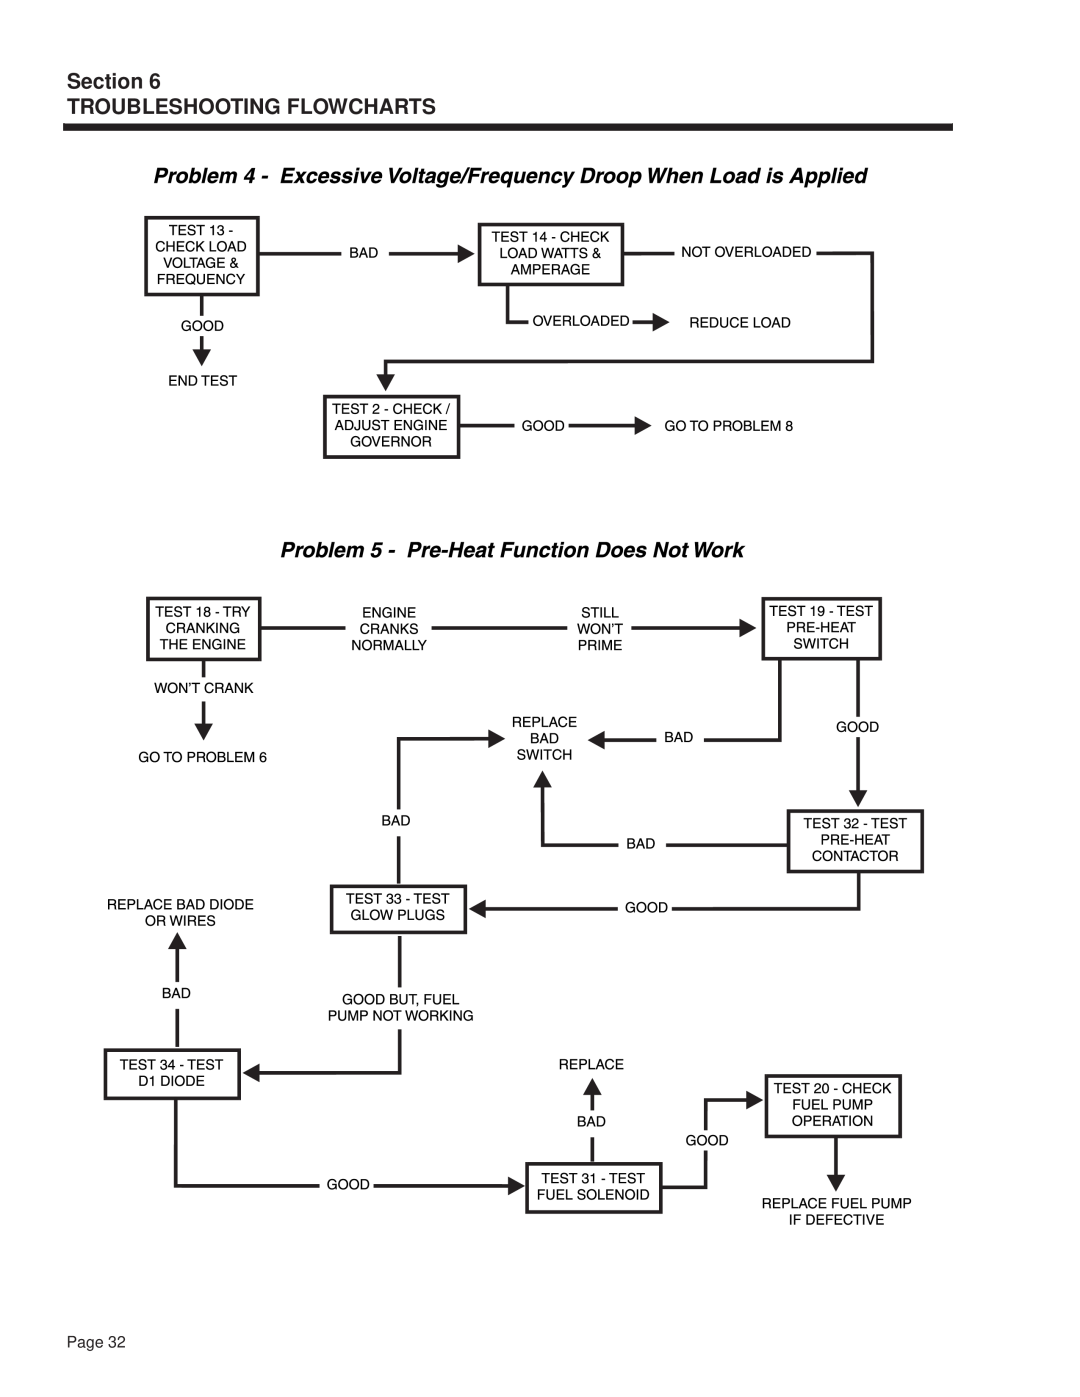 Guardian Technologies 4270 manual Section TROUBLESHOOTING FLOWCHARTS, Page 